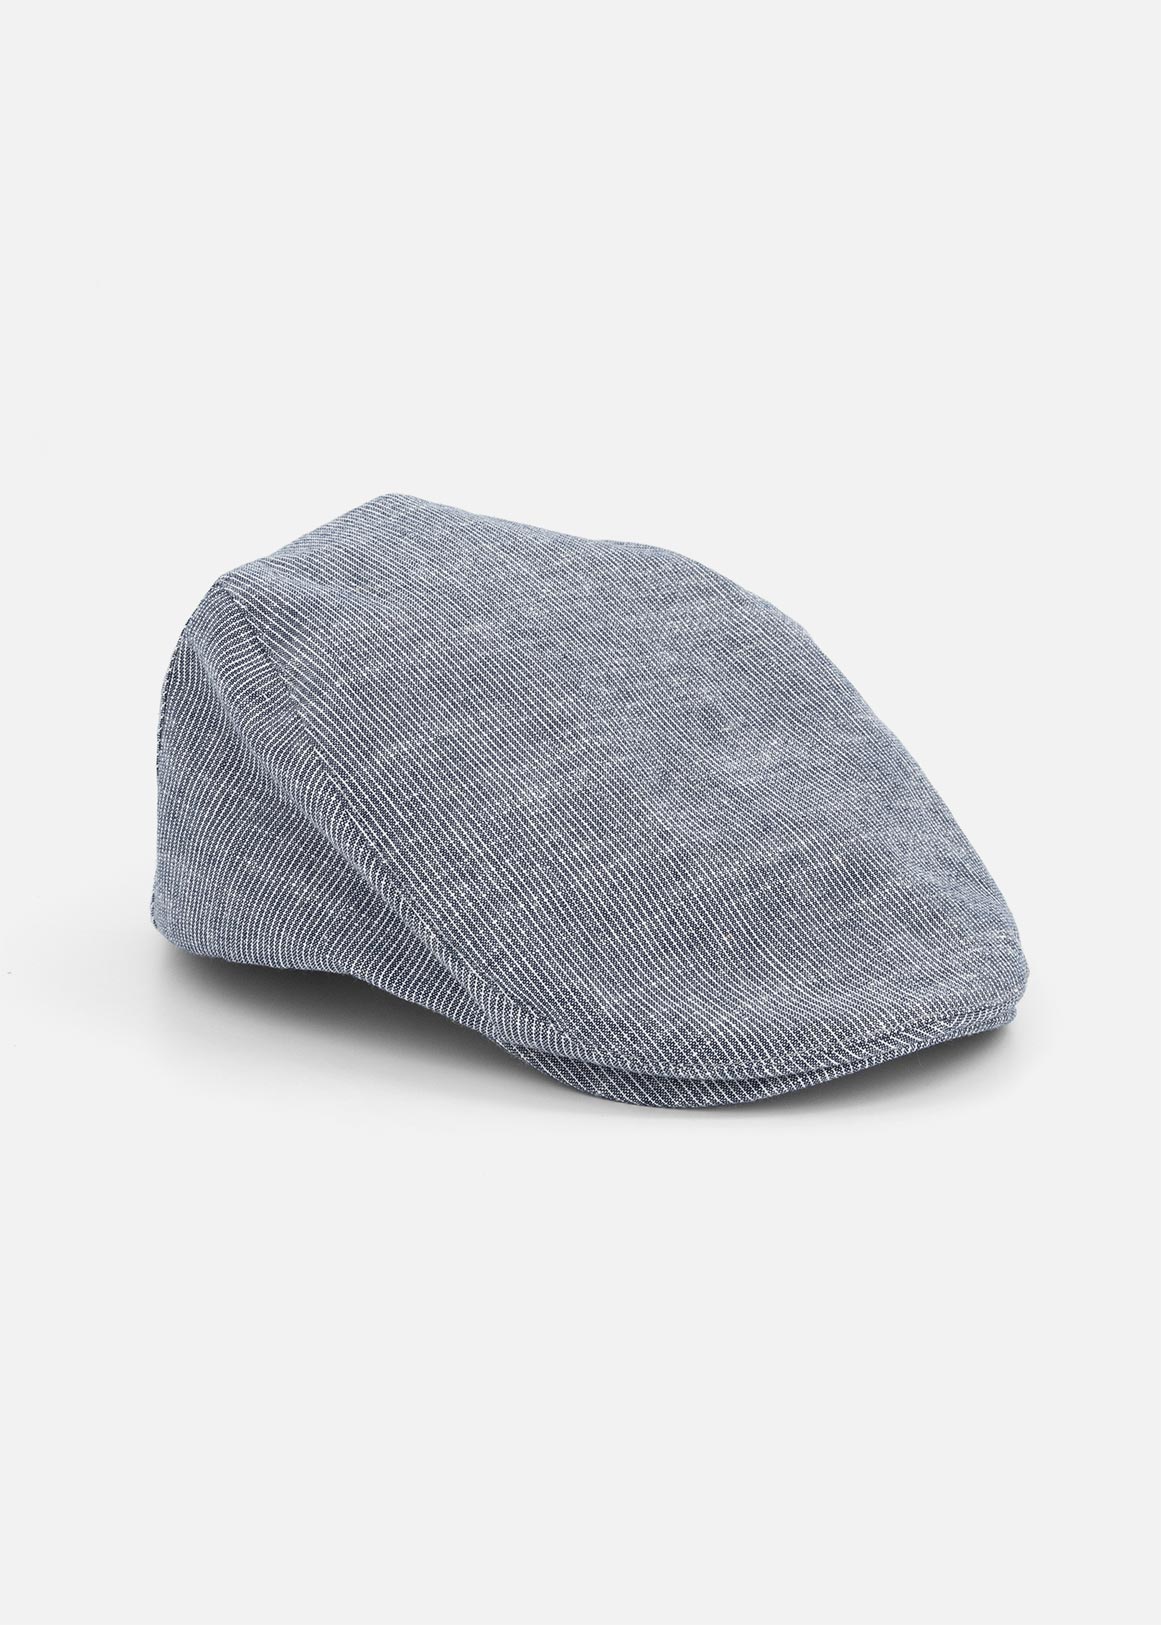 SS22 DESIGN FLAT CAP - Woolworths Mauritius Online